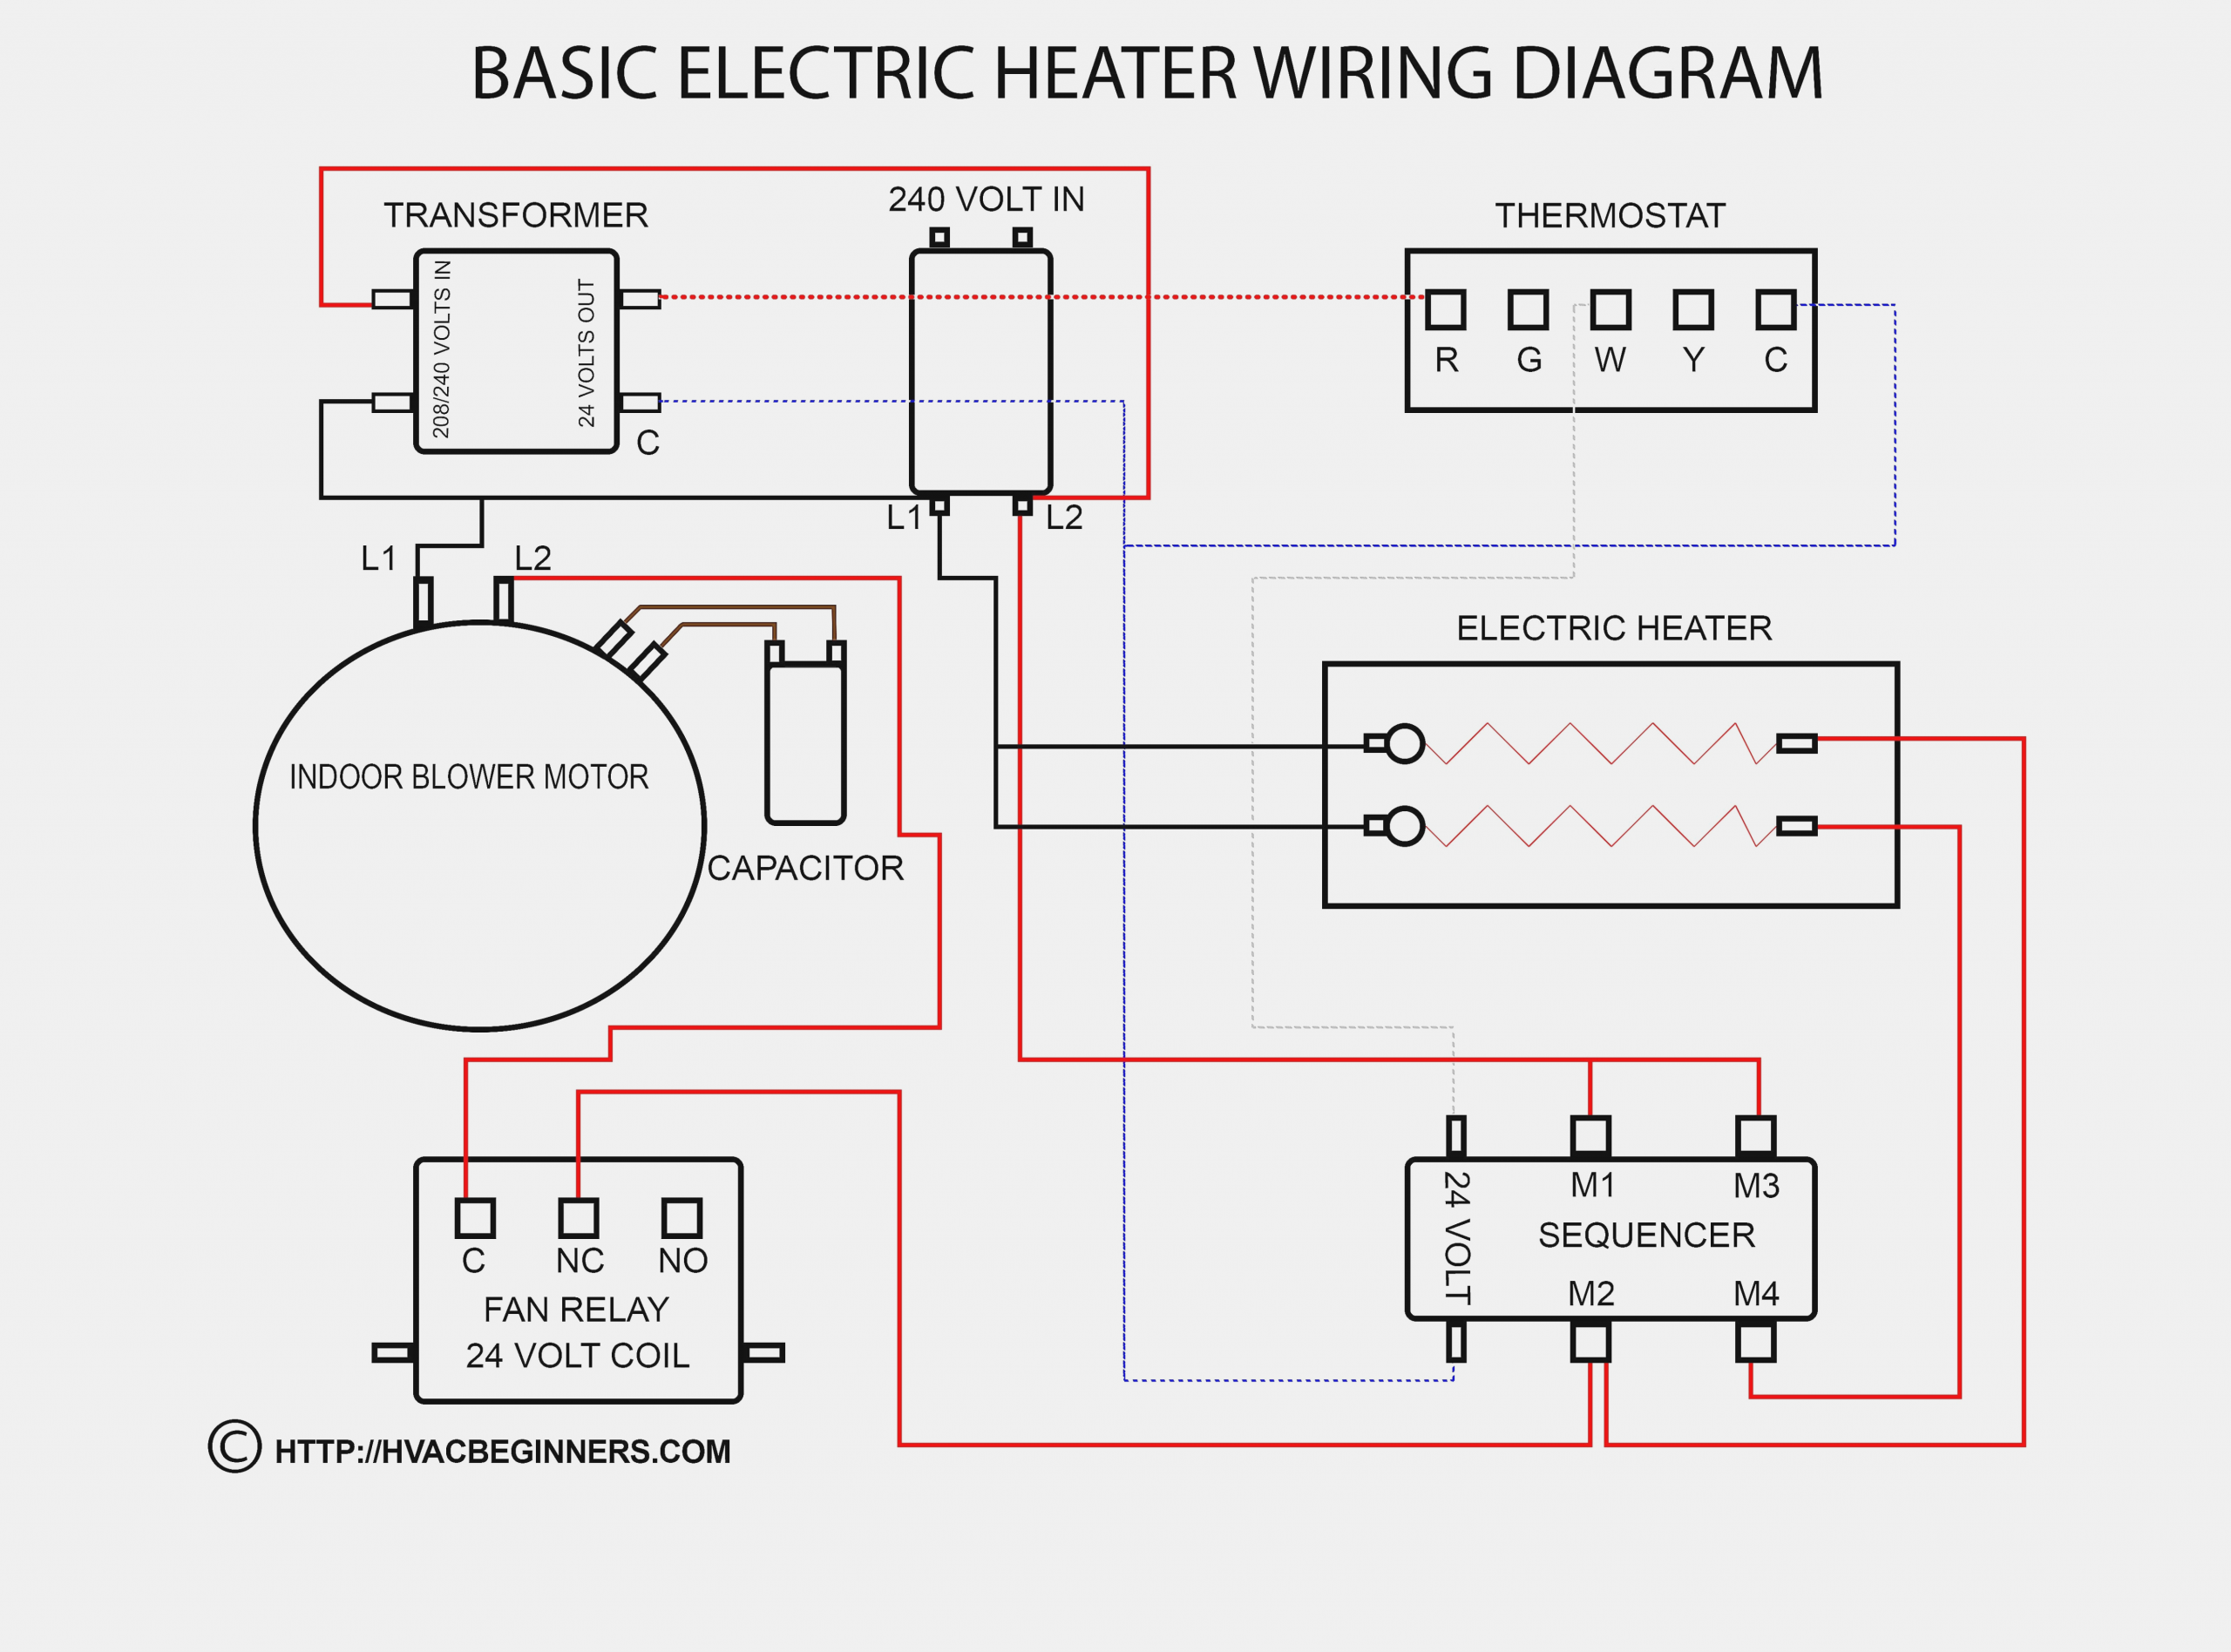 New Wiring Diagram For Home Water Heater Diagram with regard to dimensions 4850 X 3592